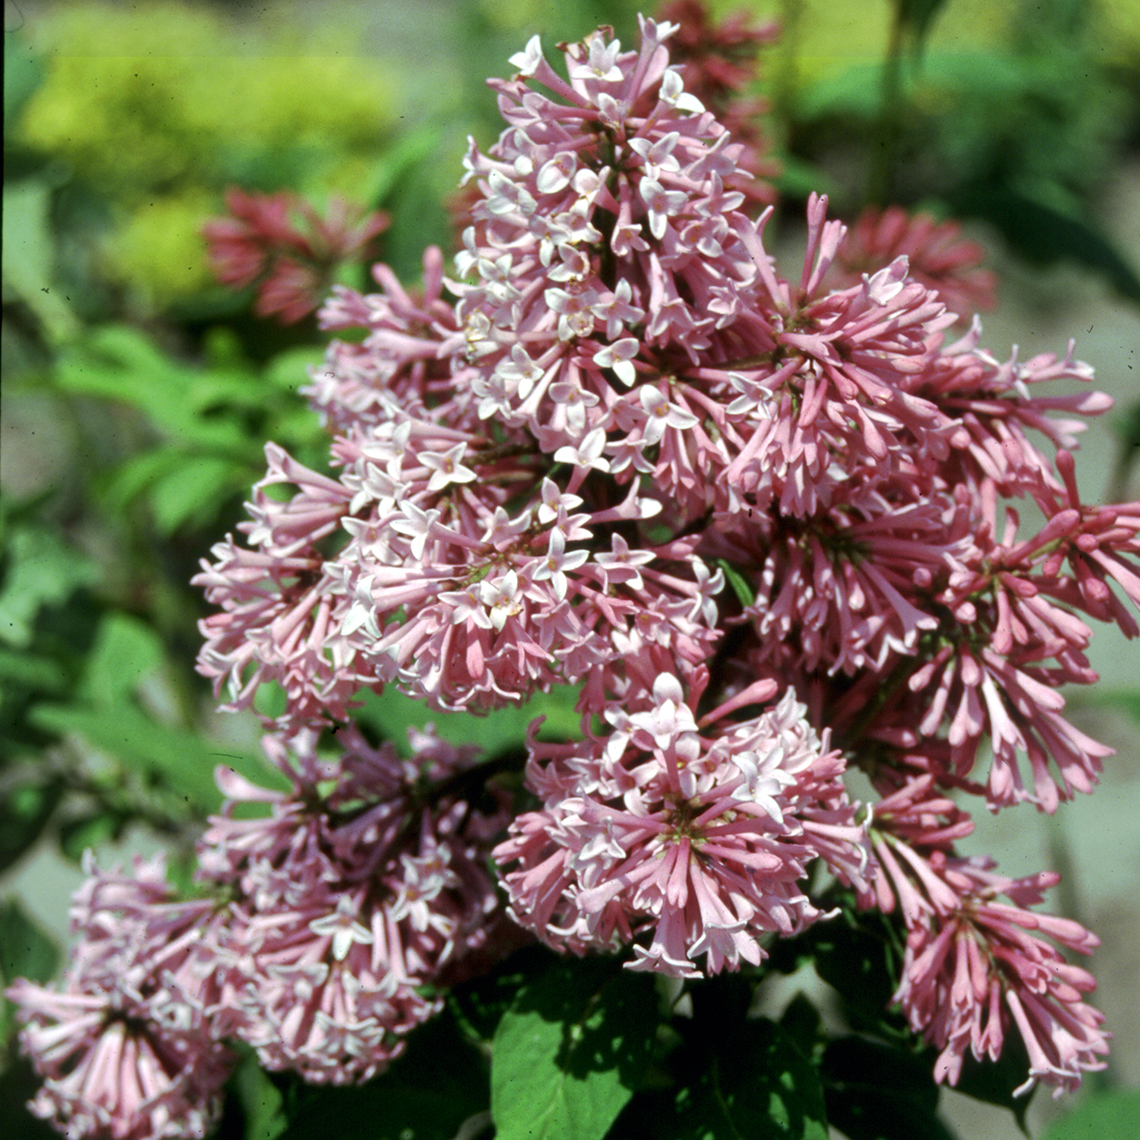 A densely flowered inflorescence of Miss Canada lilac which has pink blooms